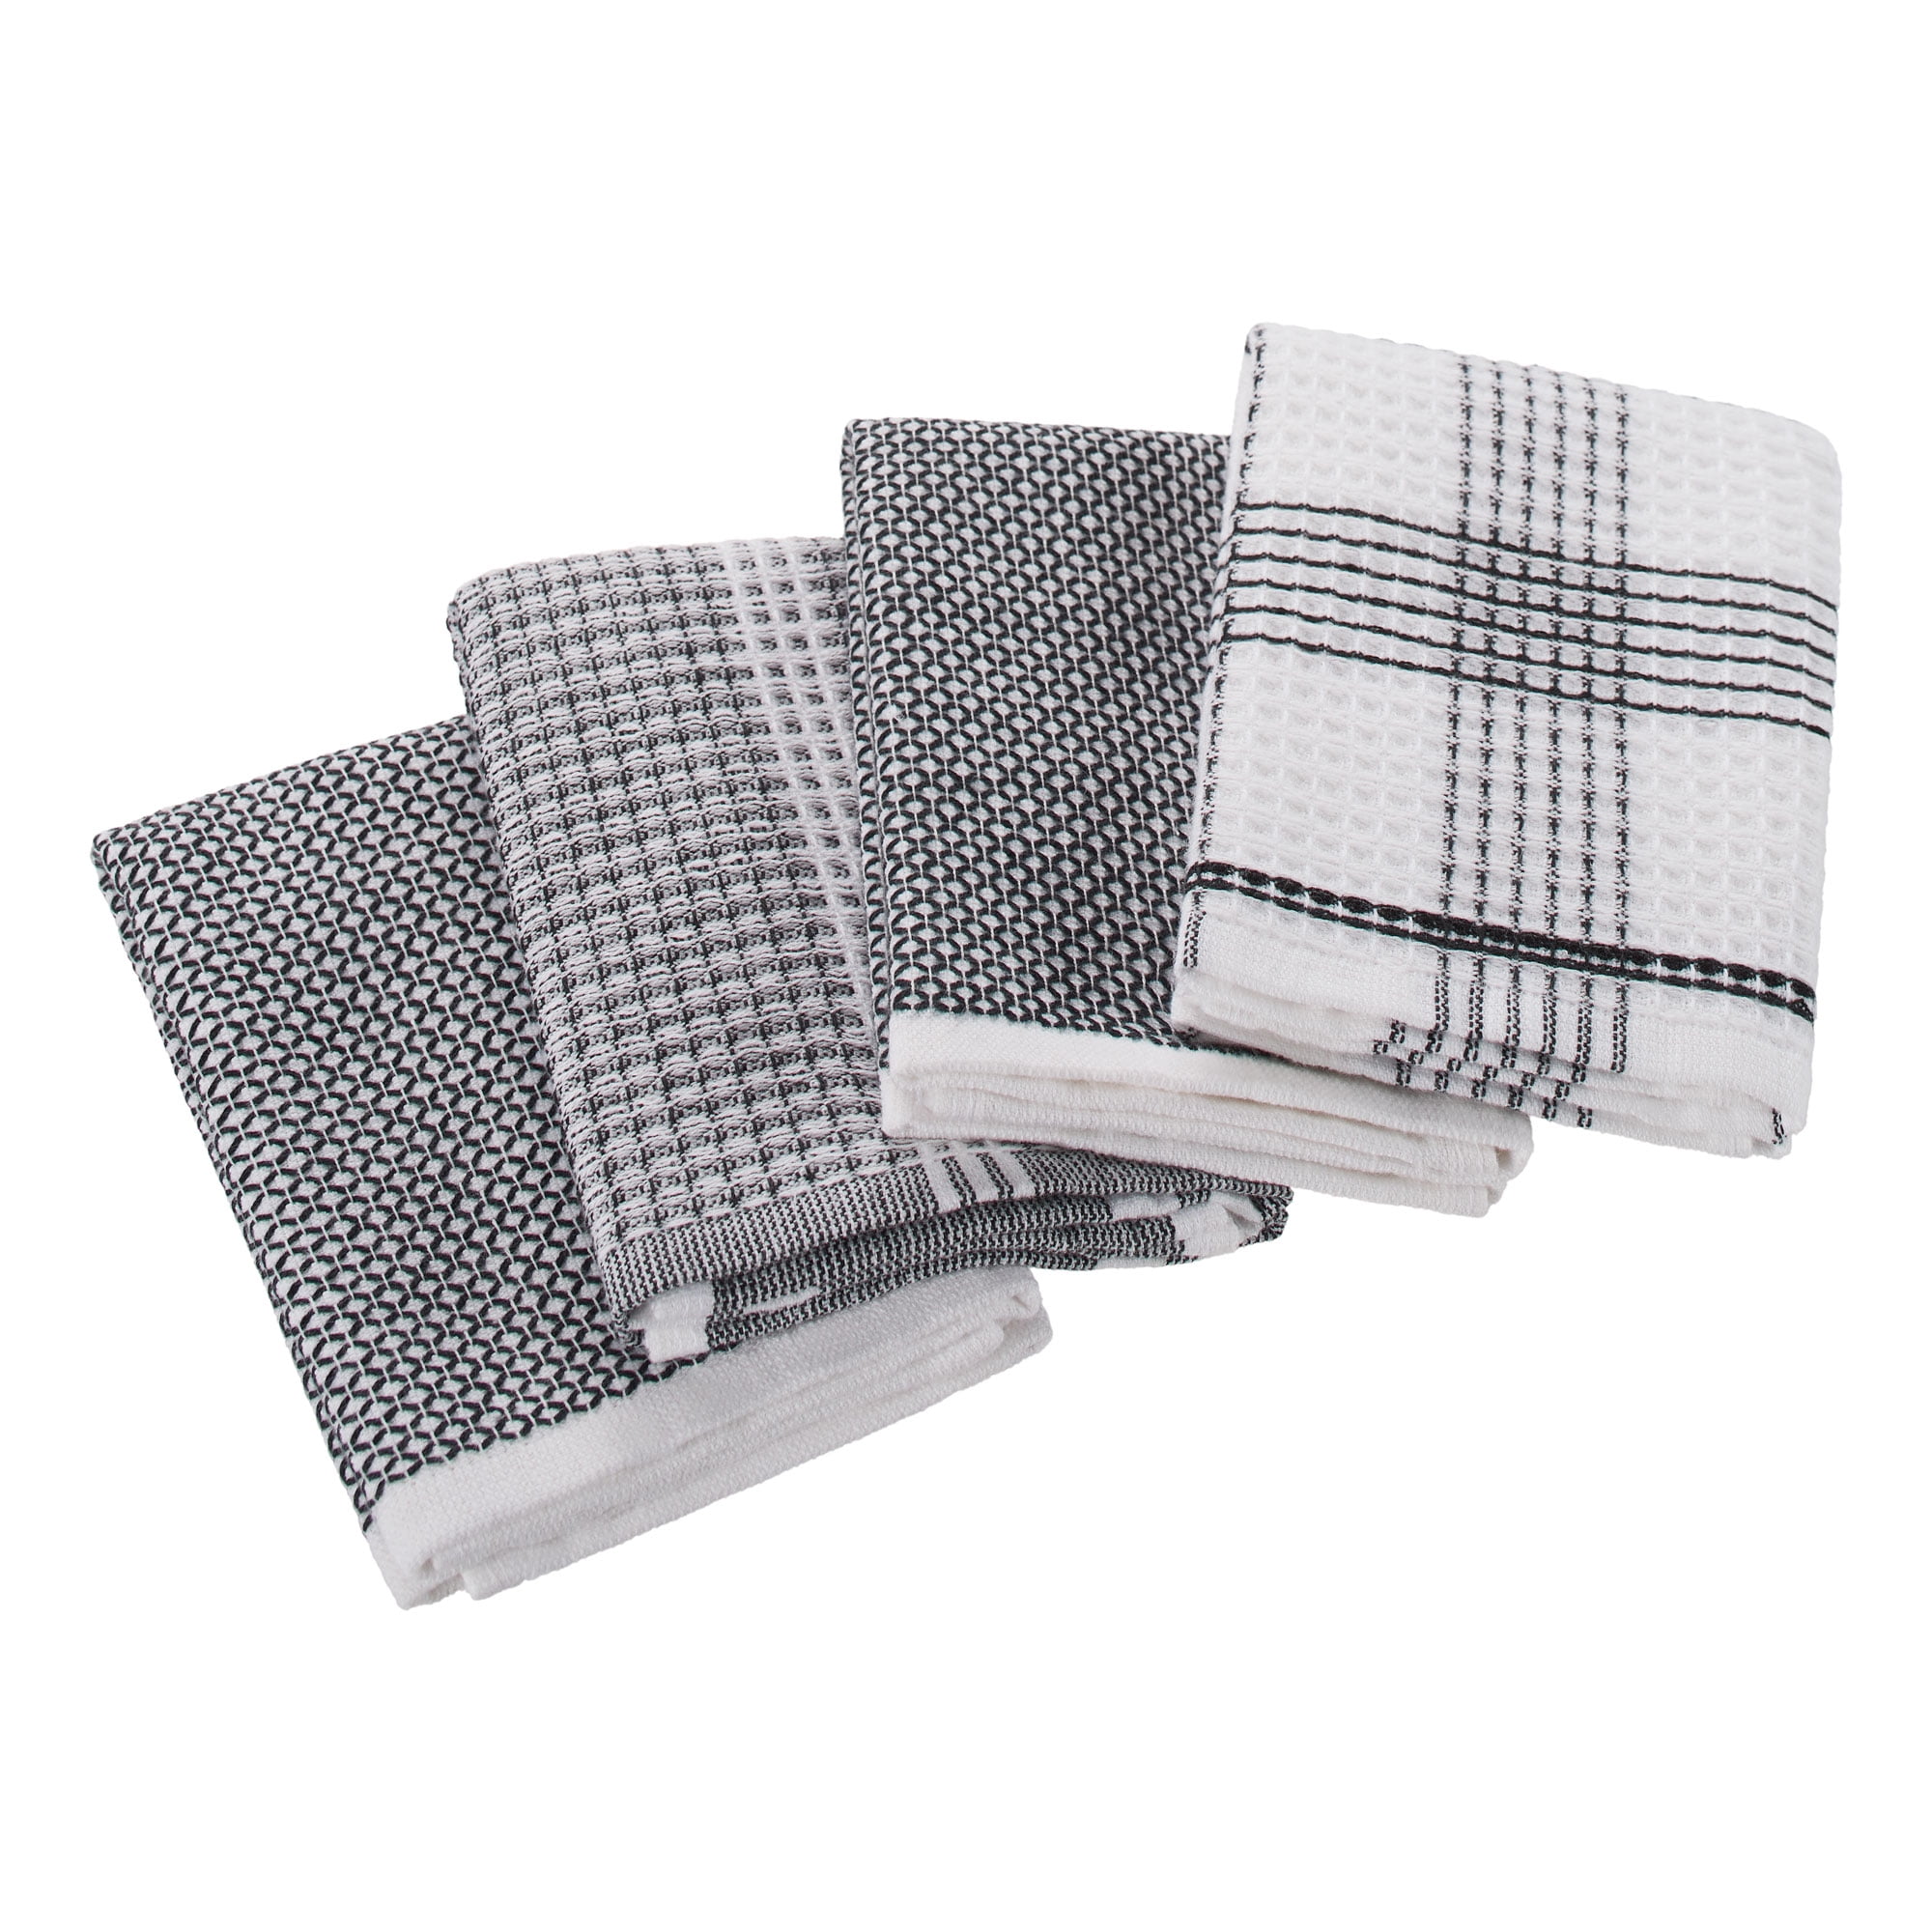 Dish Cloth (Set of 4) August Grove Color: Black